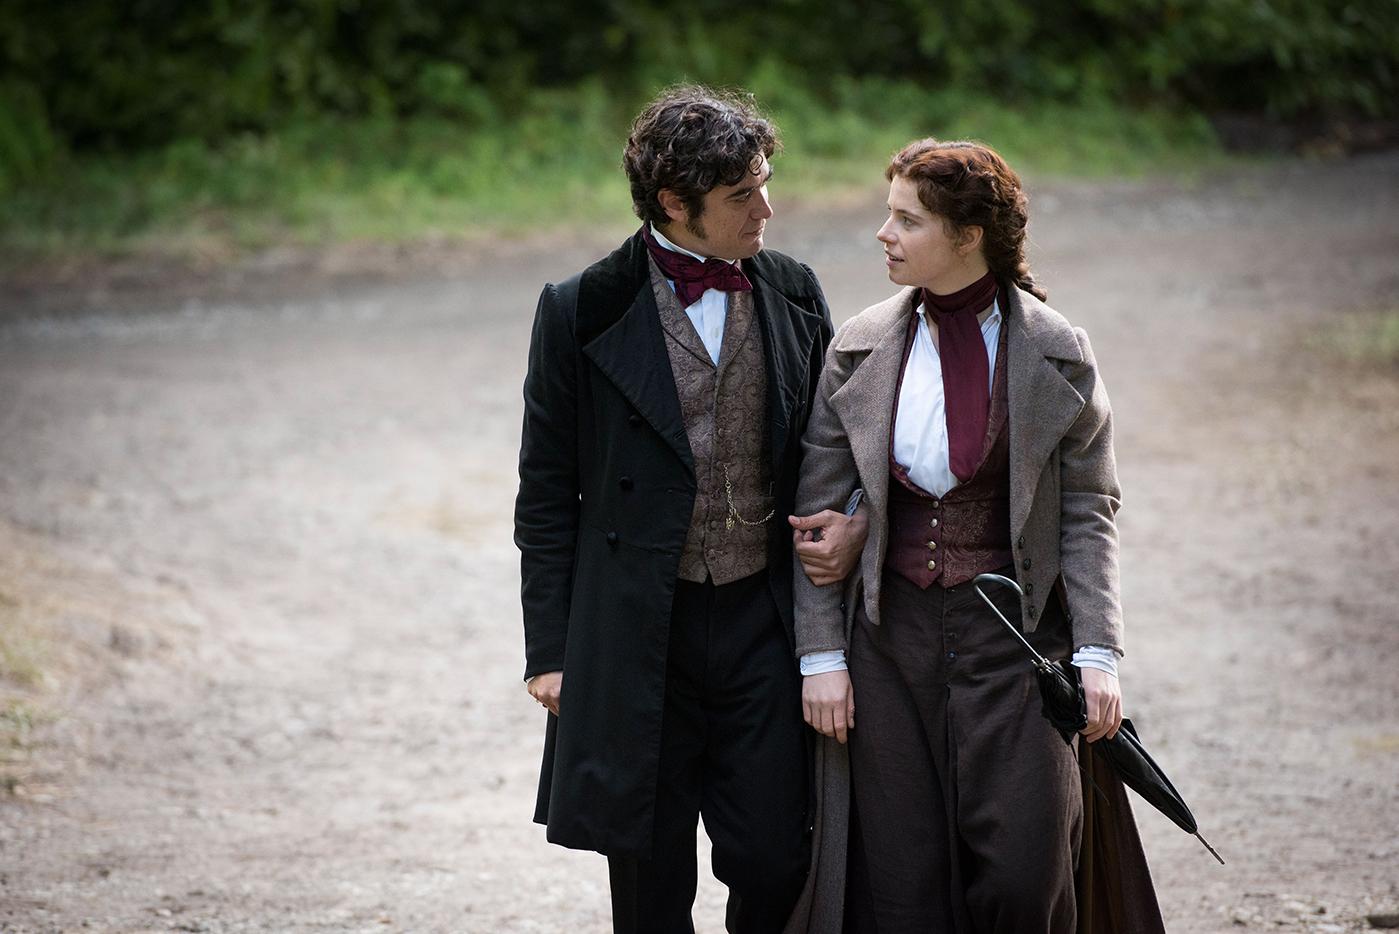 Riccardo Scamarcio as Count Fosco and Jessie Buckley as Marian Hartwright in The Woman in White. Photo: The Woman in White Productions Ltd. / Steffan Hill / Origin Pictures